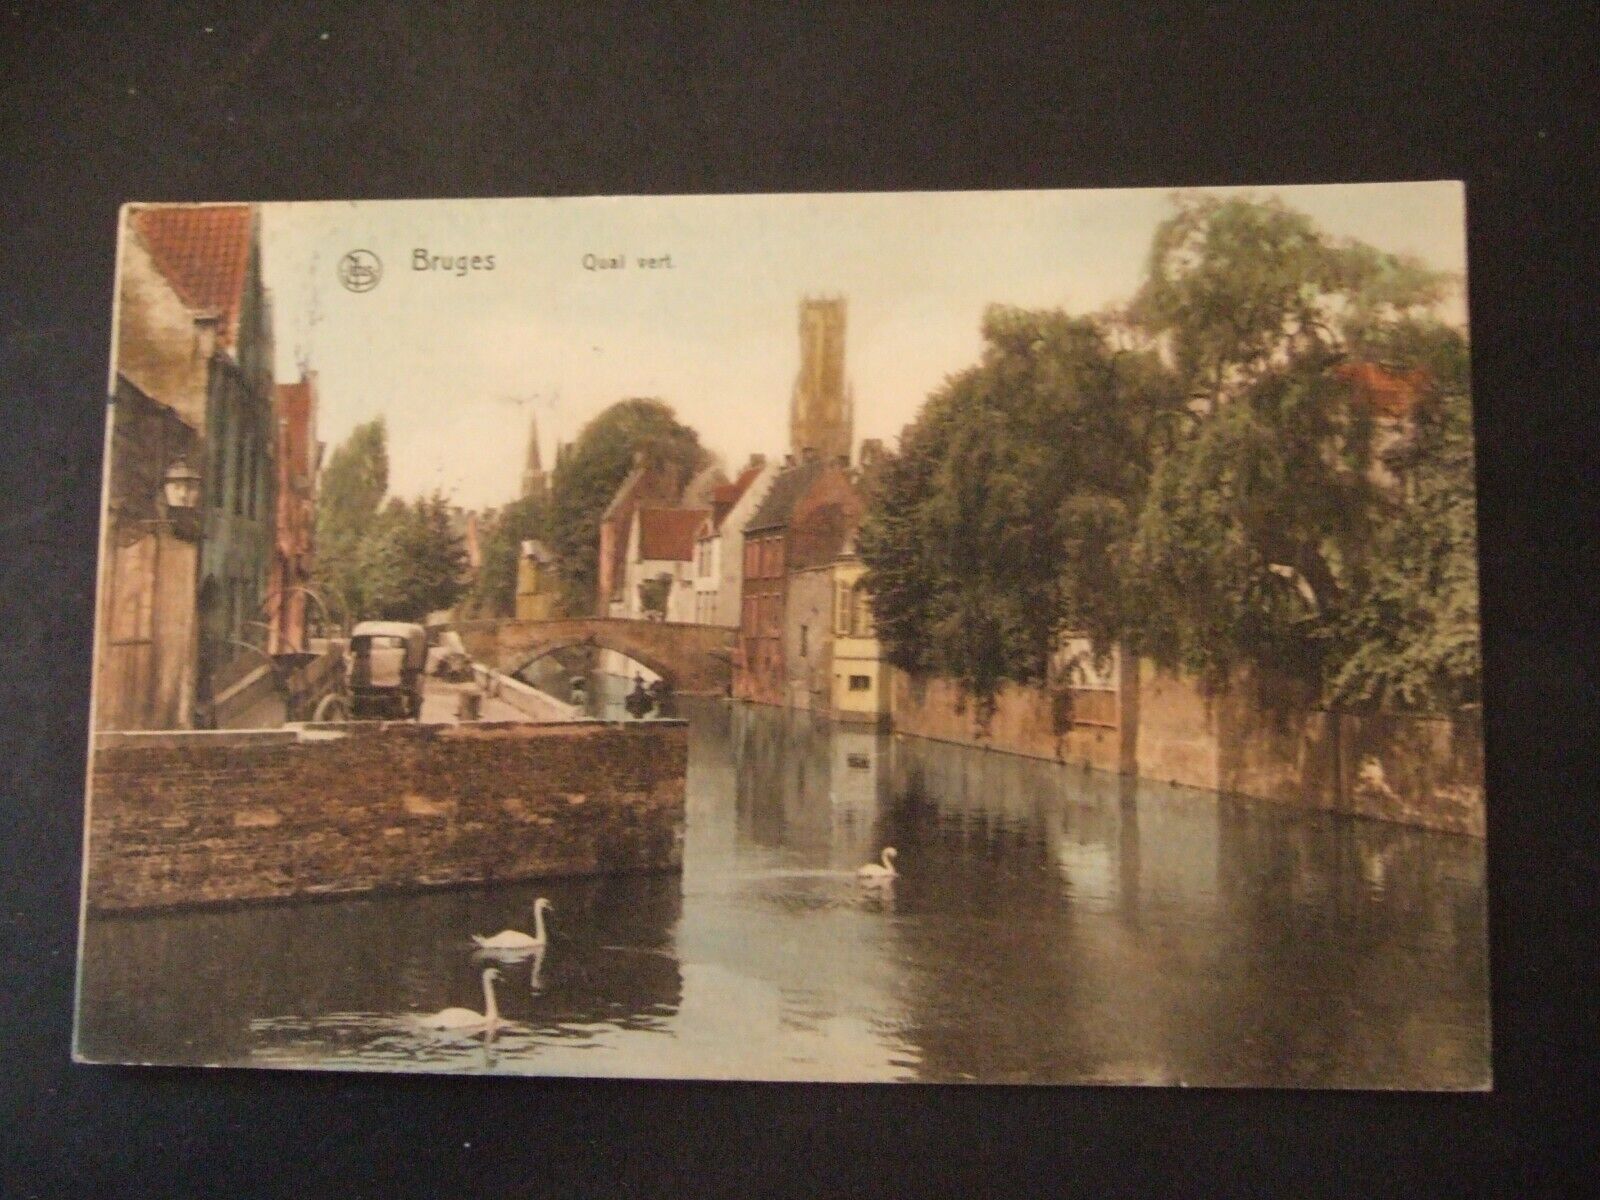 House Clearance - Service. Bruges, Quai vert. Posted to "High Briery", Keswick, 1913. Ed Nels.